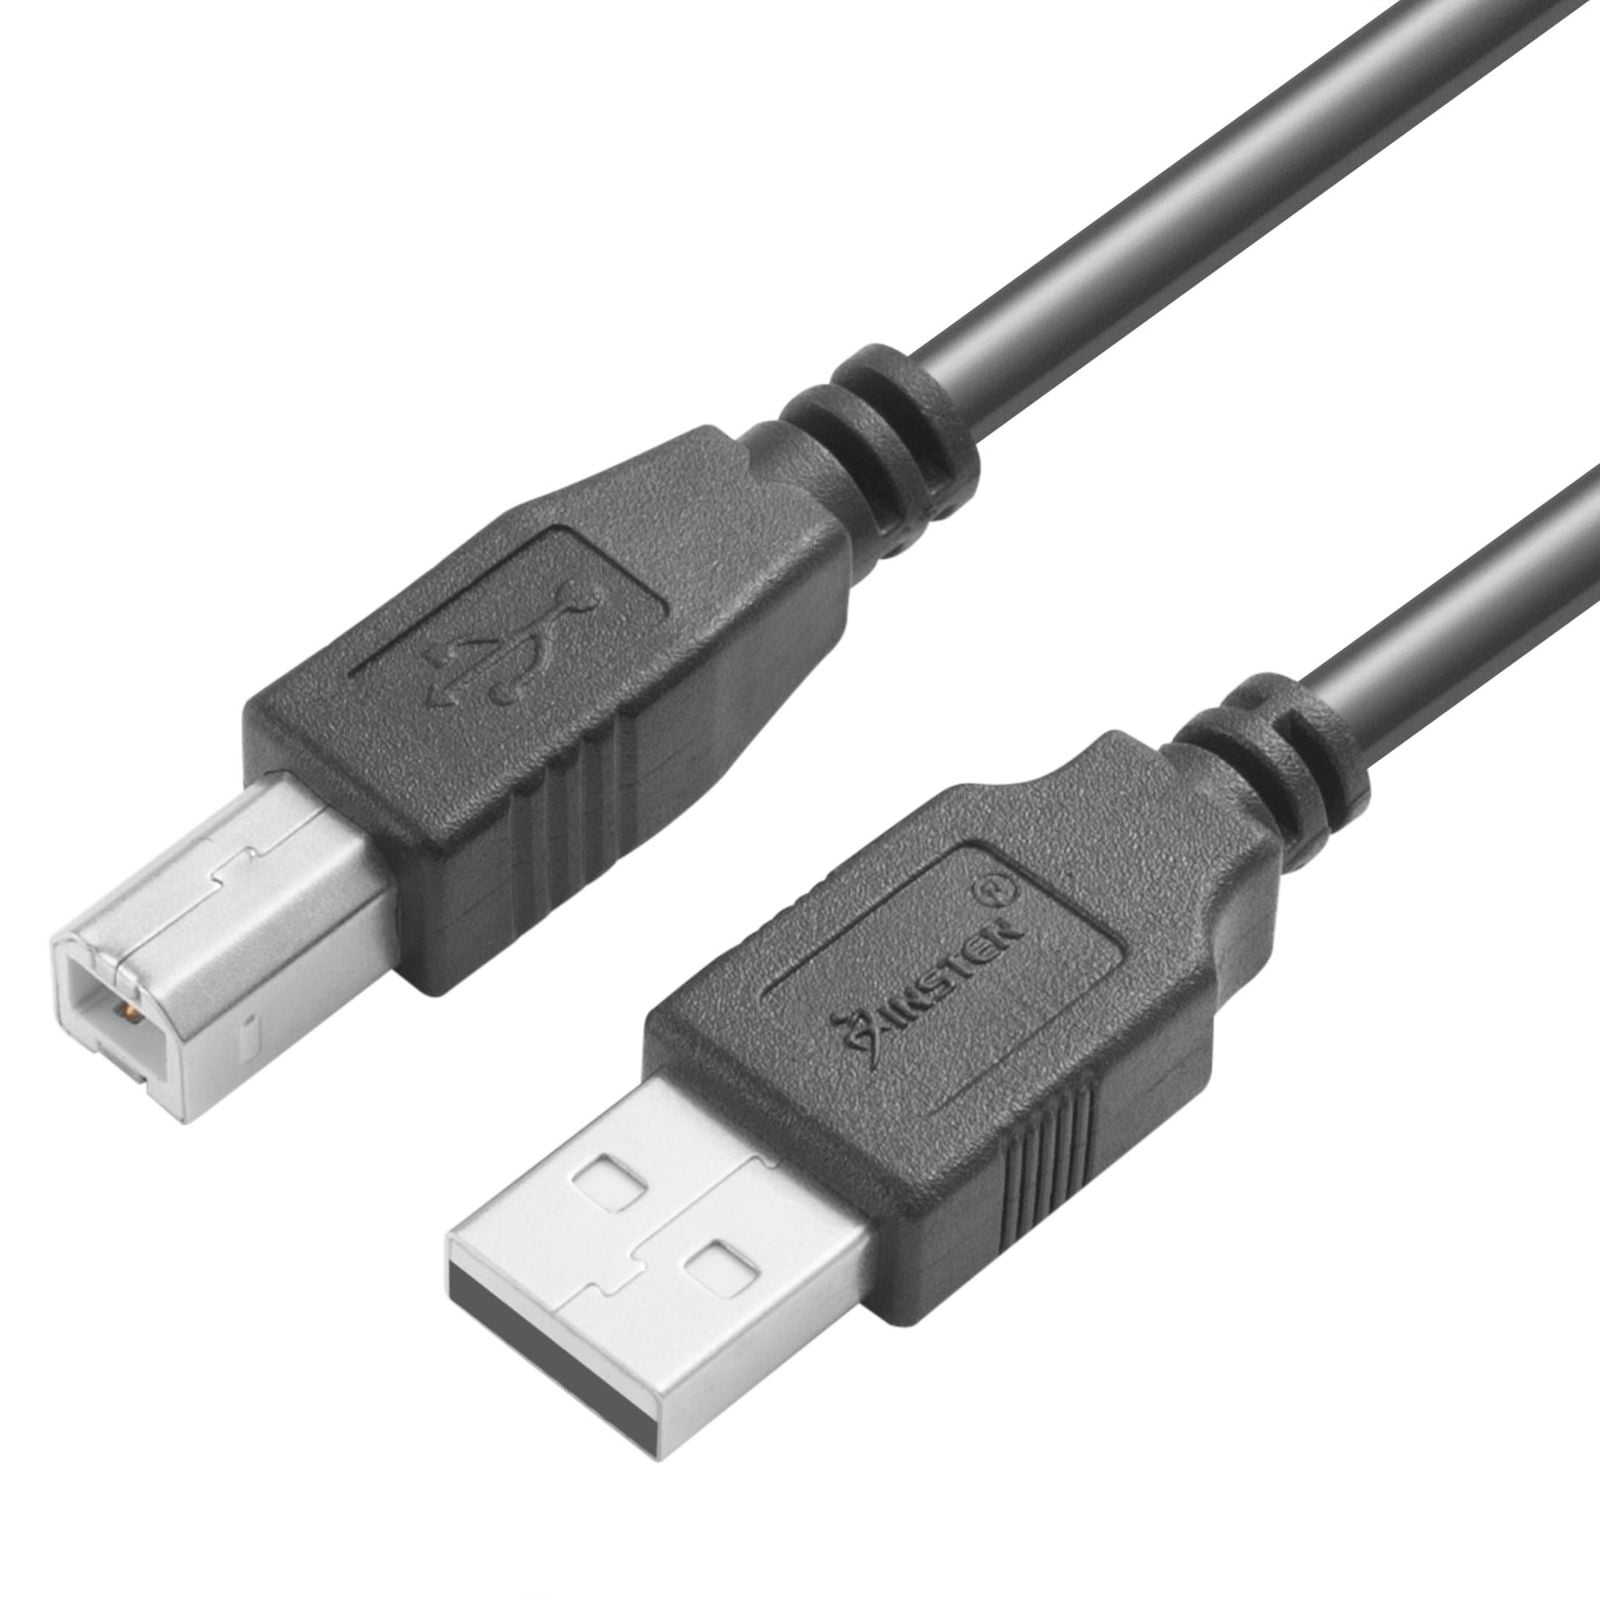 10 pieces CABLE USB 2.0 B MALE-B MALE 3M 